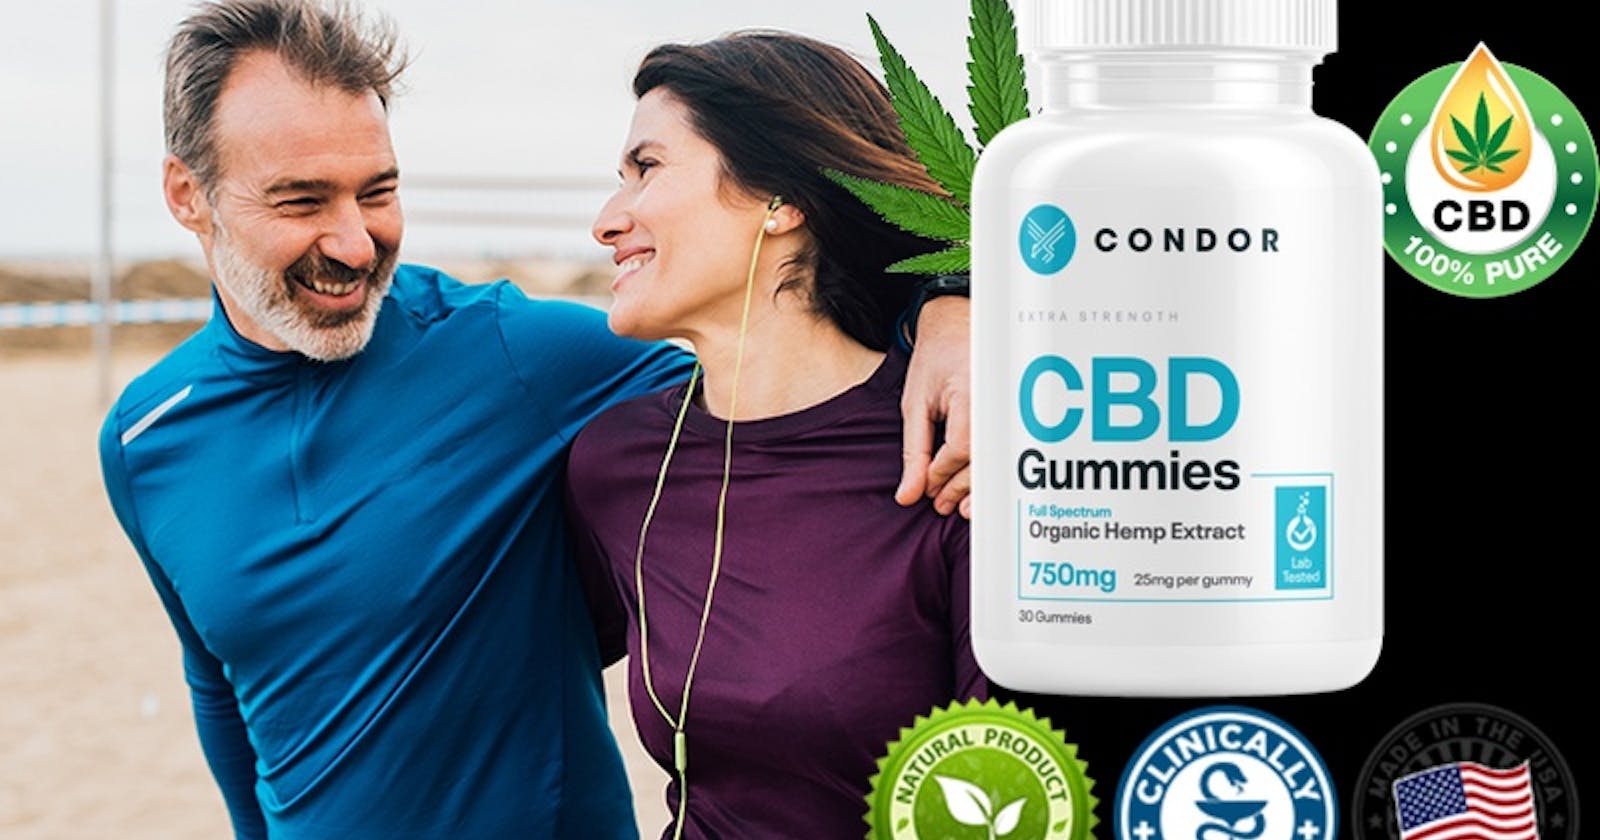 Condor CBD Gummies - Is it Safe? Get Rid Of Chronic Pain, Price & Where To Buy?